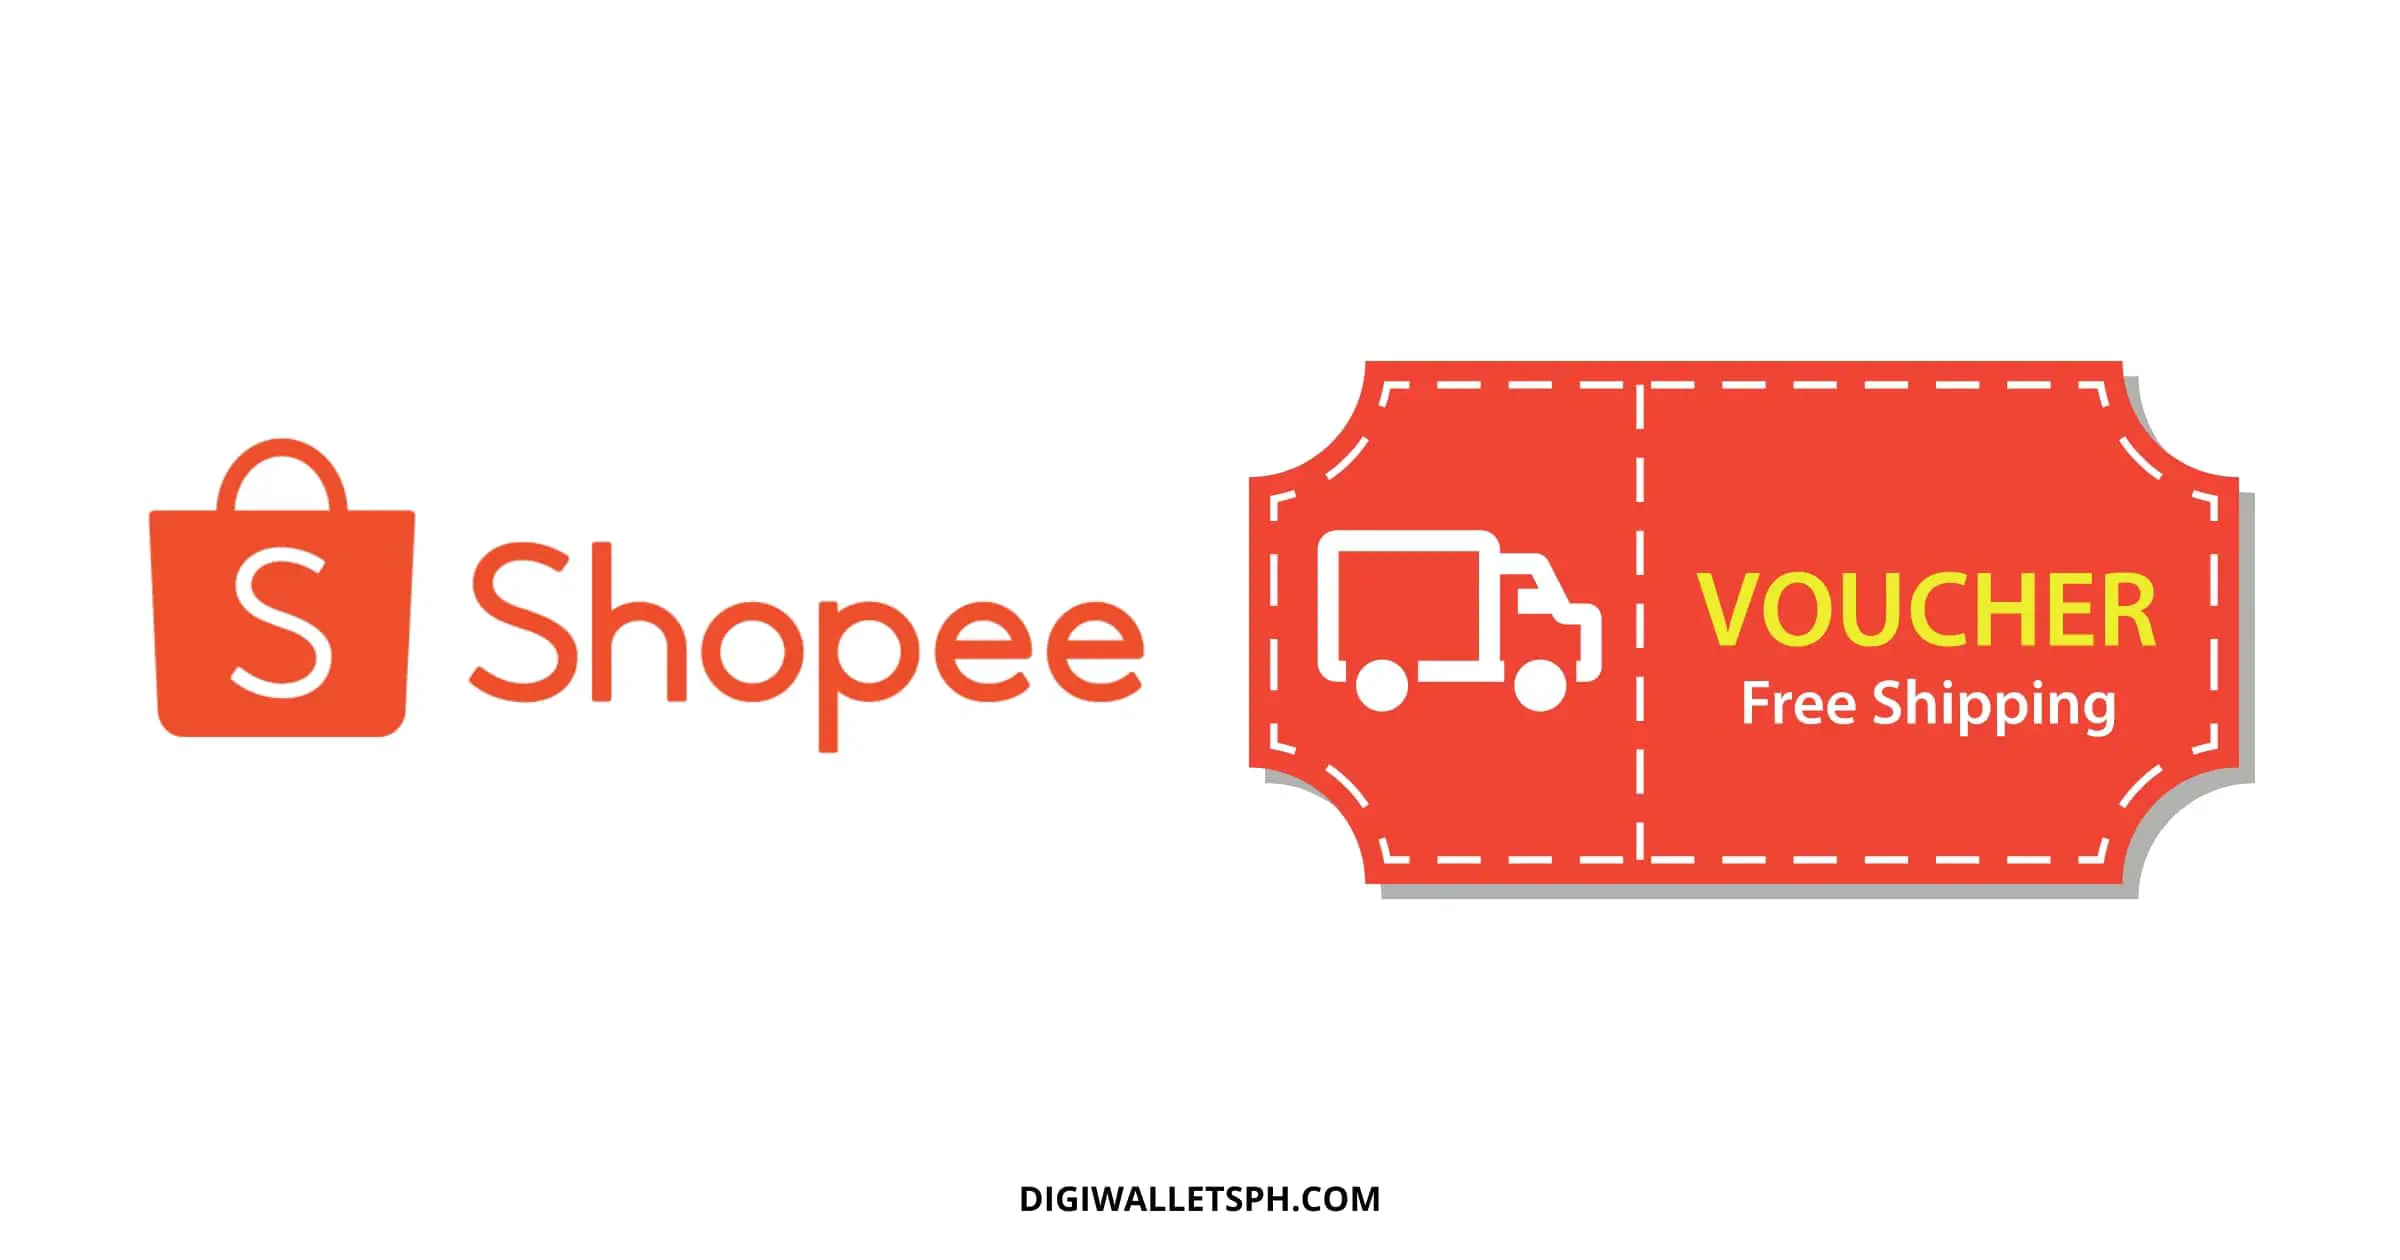 How to avail free shipping in Shopee